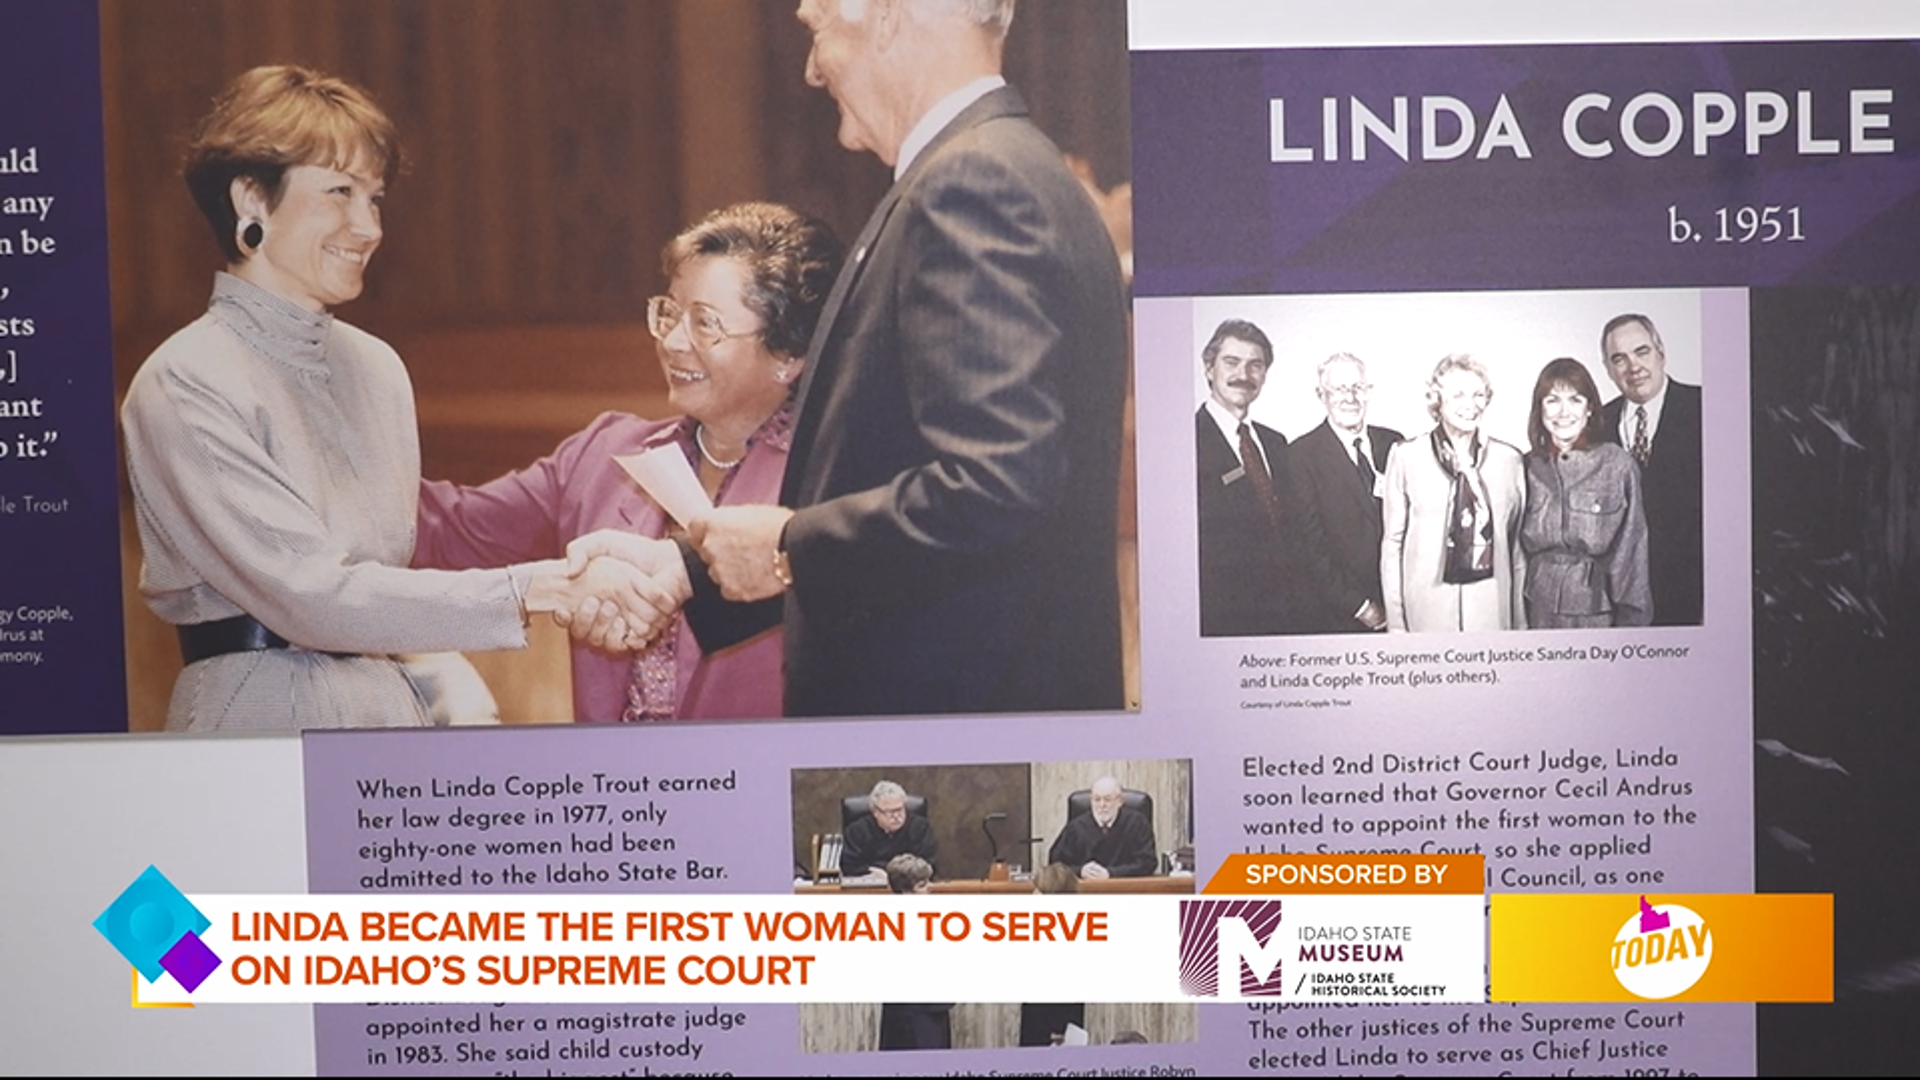 Linda became the first woman to serve on Idaho's Supreme Court! Sponsored by the Idaho State Museum.